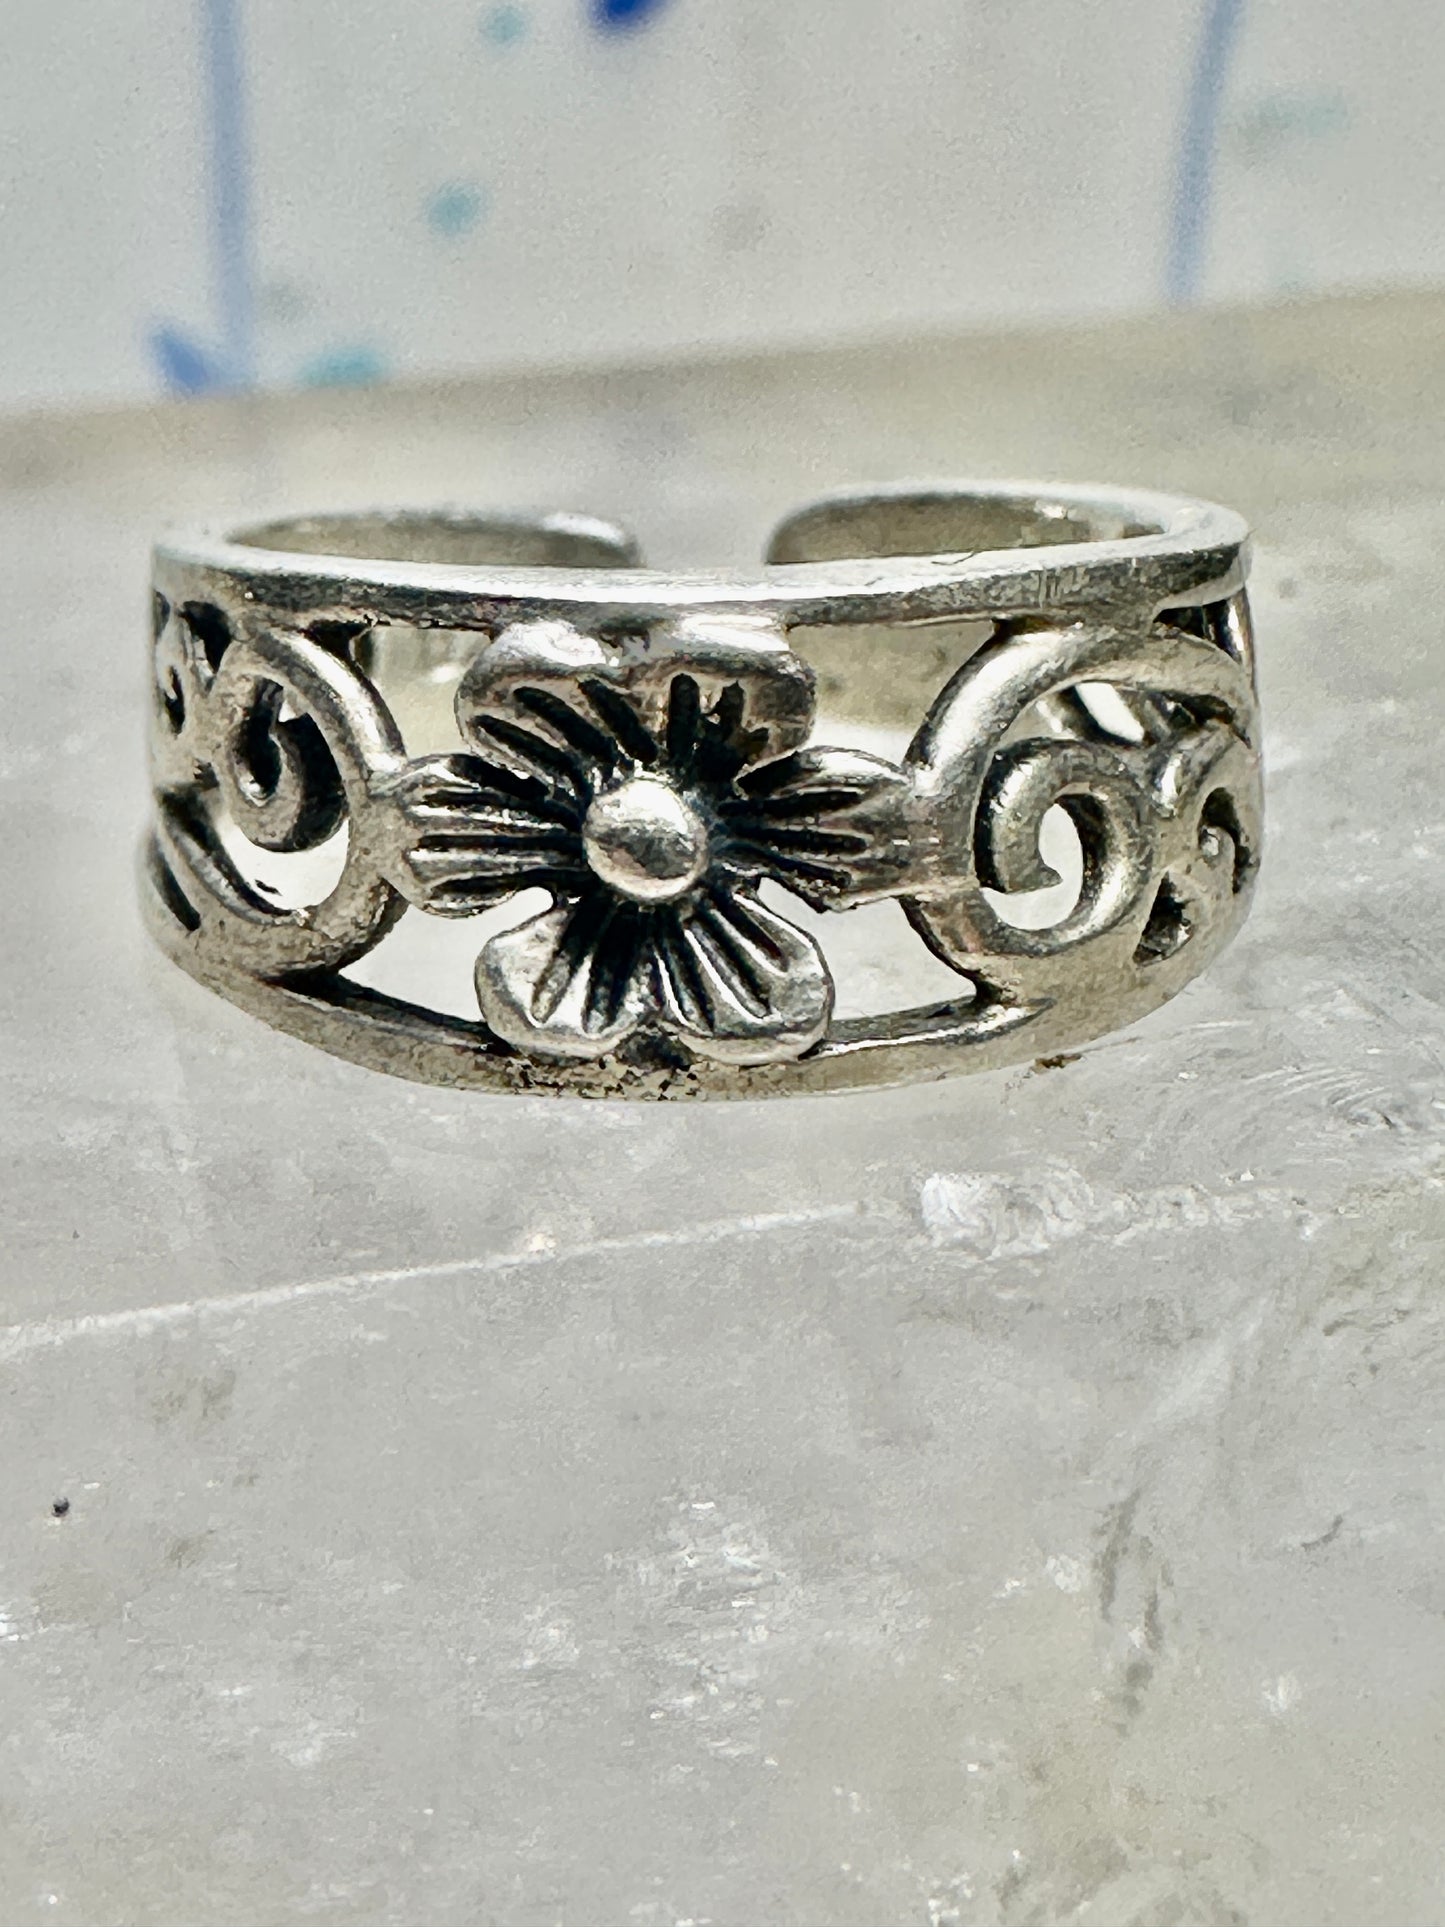 Toe ring flower floral scrollwork band size 3.50 sterling silver women